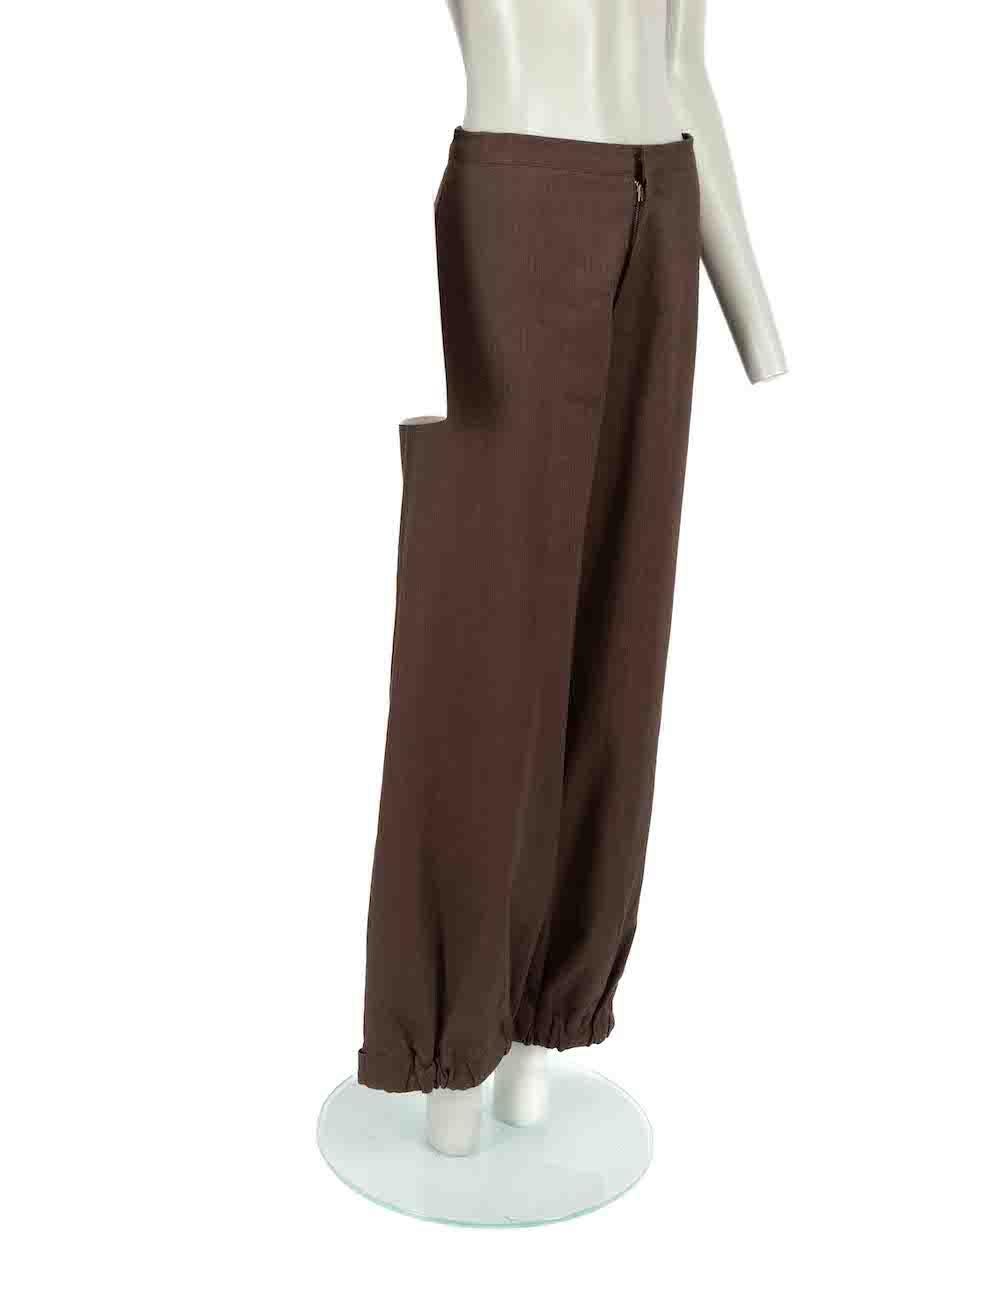 CONDITION is Very good. Hardly any visible wear to trousers is evident on this used Y's Yohji Yamamoto designer resale item.
 
Details
Brown
Cotton
Tapered parachute trousers
Herringbone pattern
Mid rise
Gathered and velcro strap cuffs
Front zip